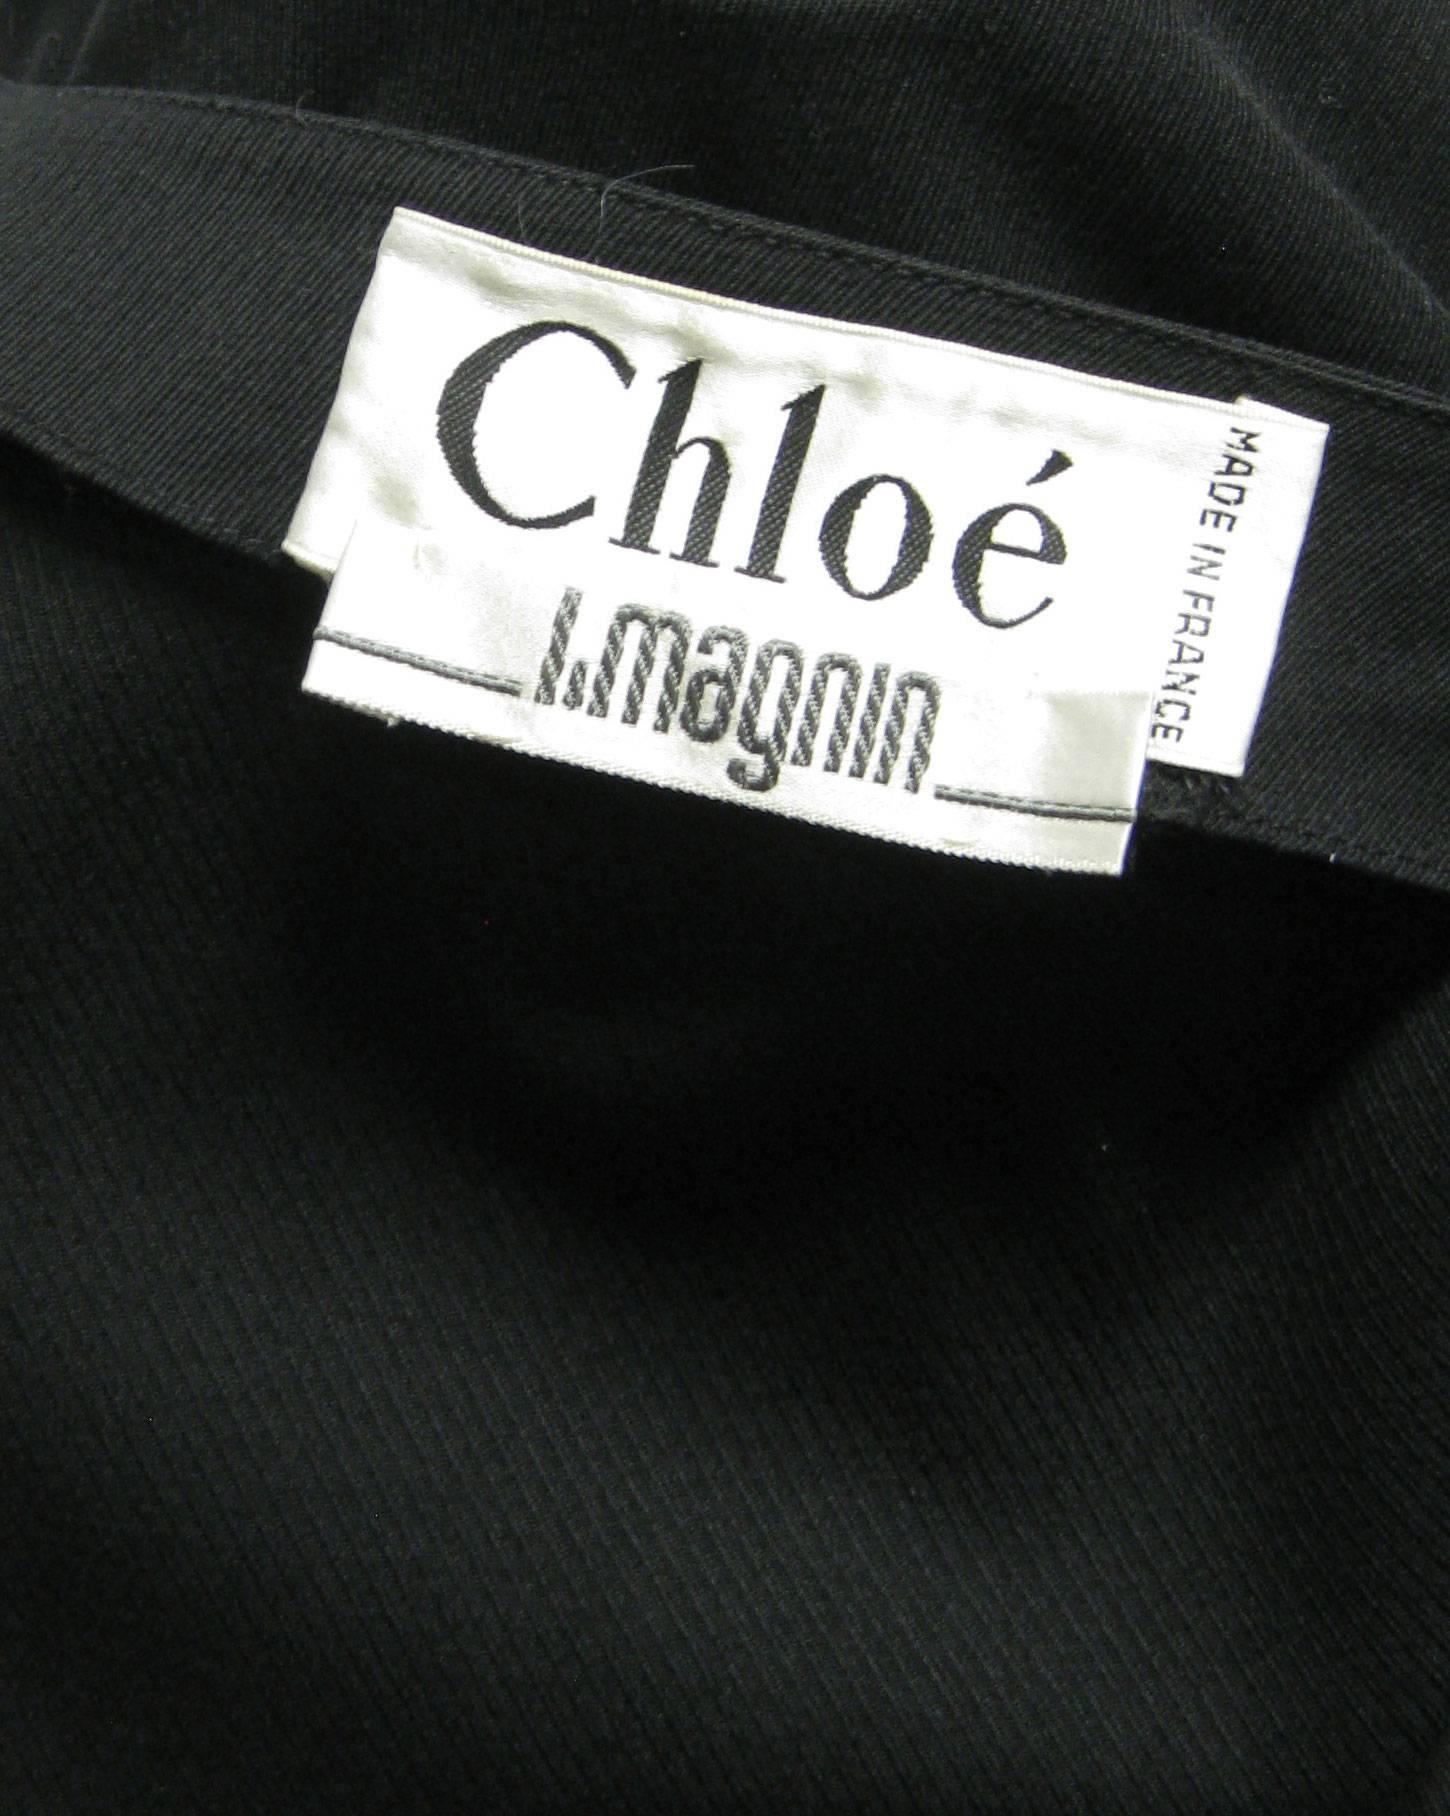 Chloe Black Cropped Jacket  In Excellent Condition For Sale In Oakland, CA